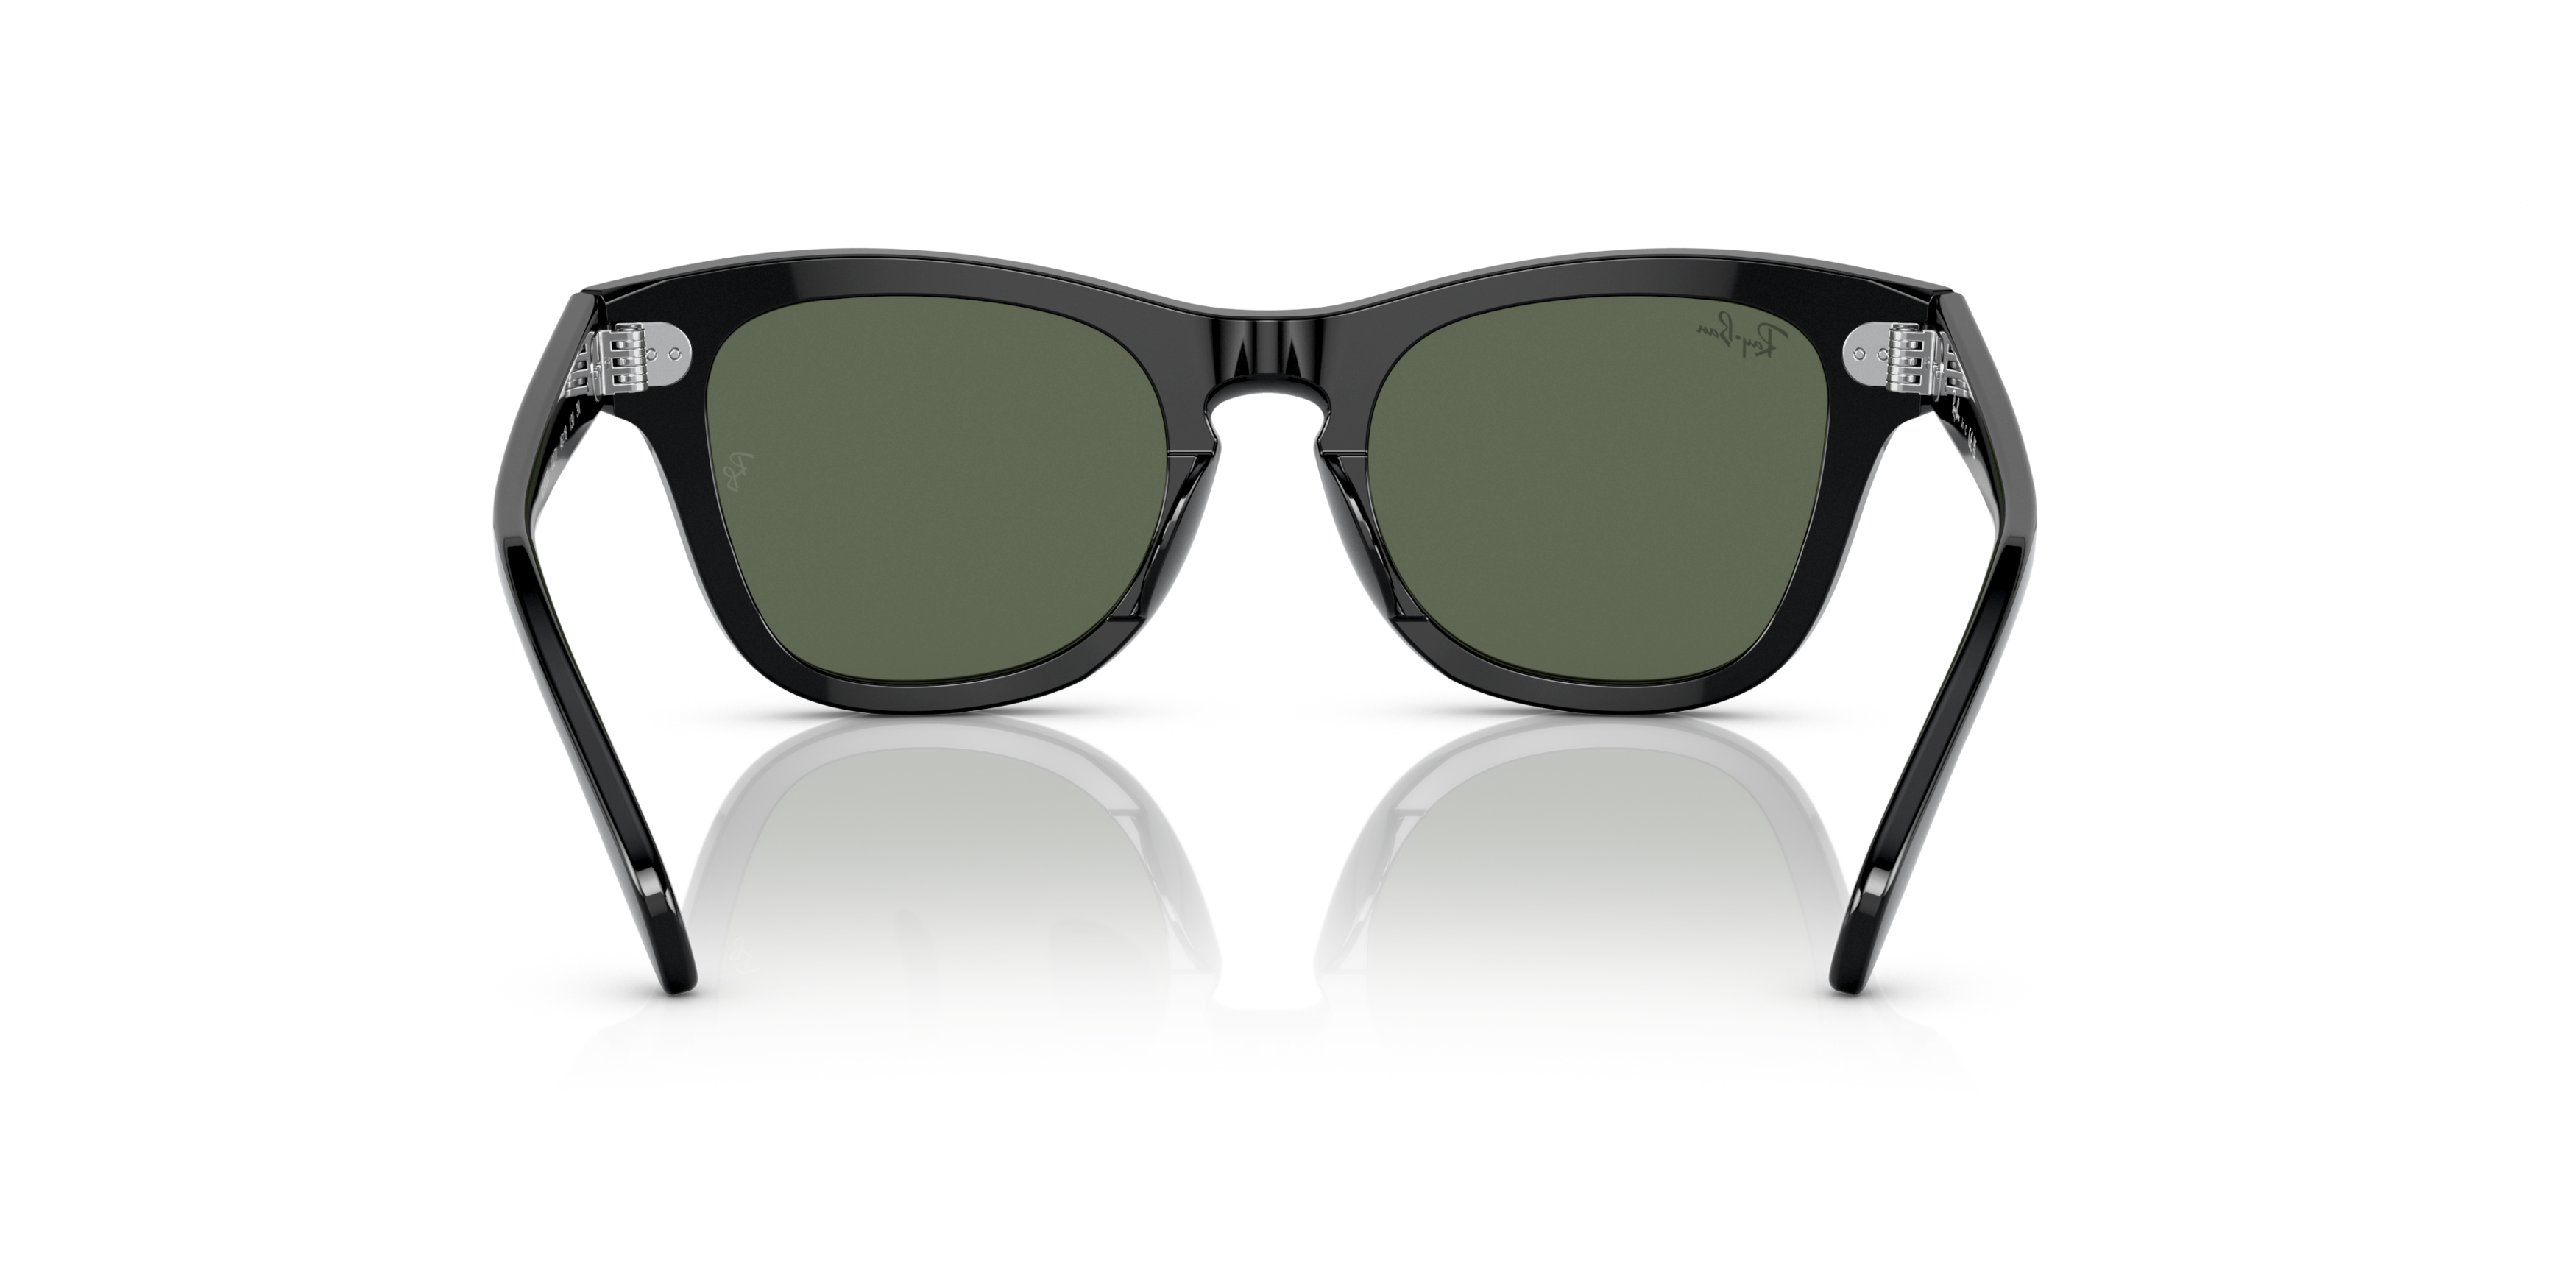 [products.image.detail02] Ray-Ban Junior 0RJ9707S 100/71